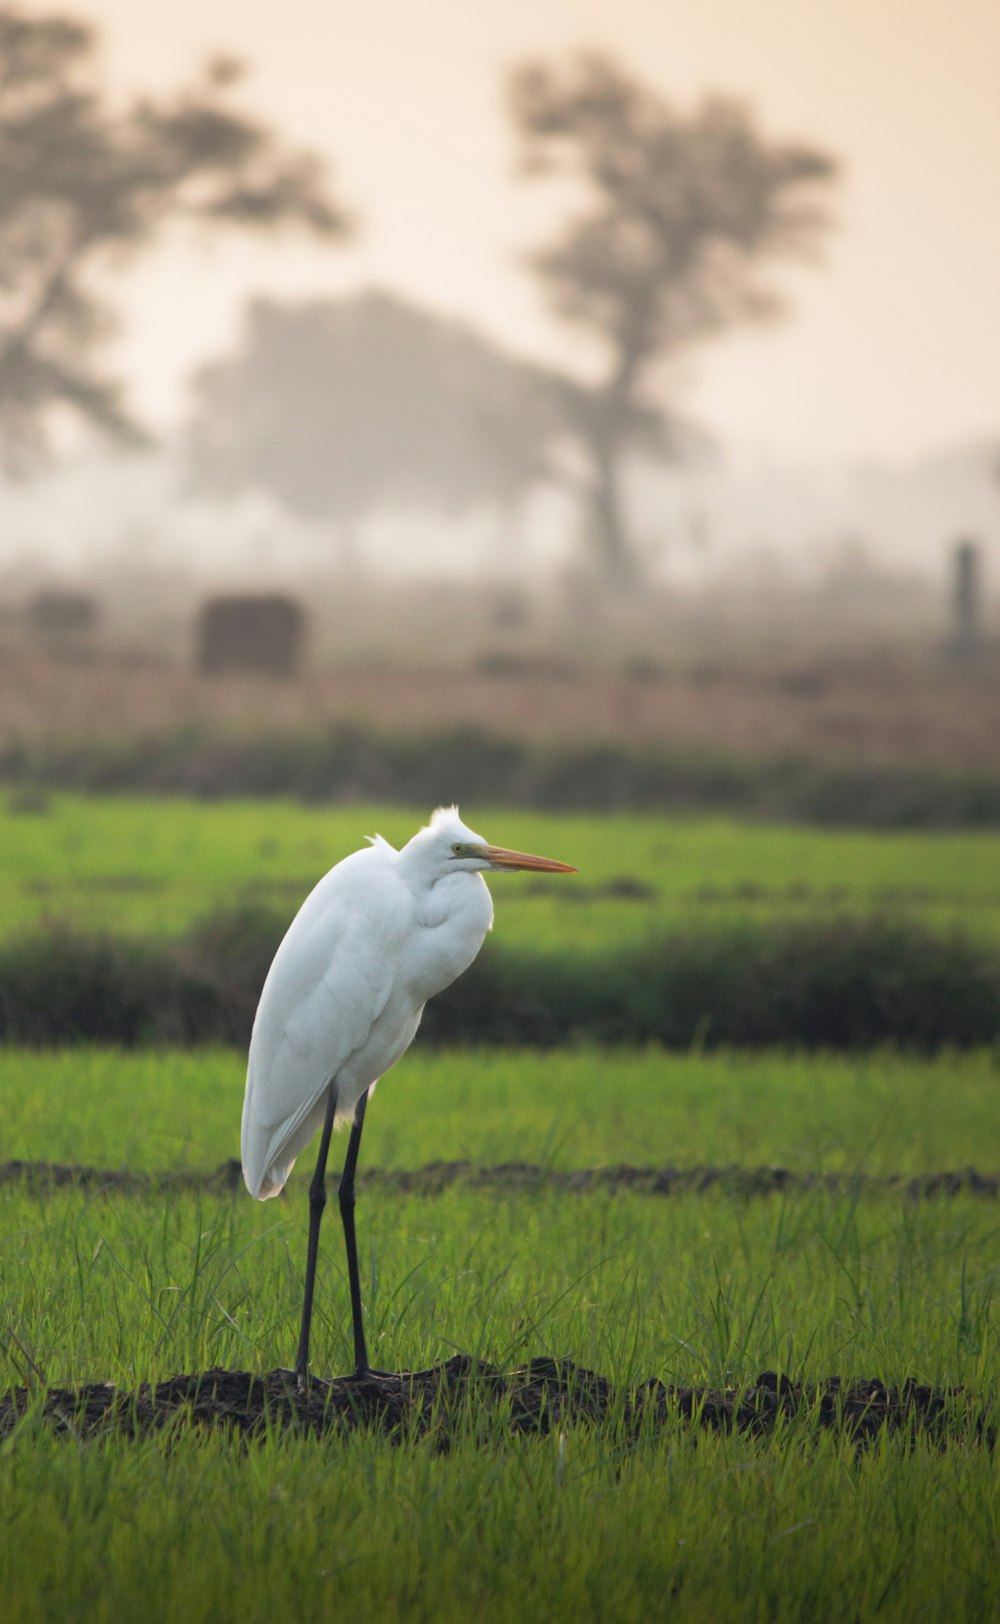 a white bird with a long beak standing in a field